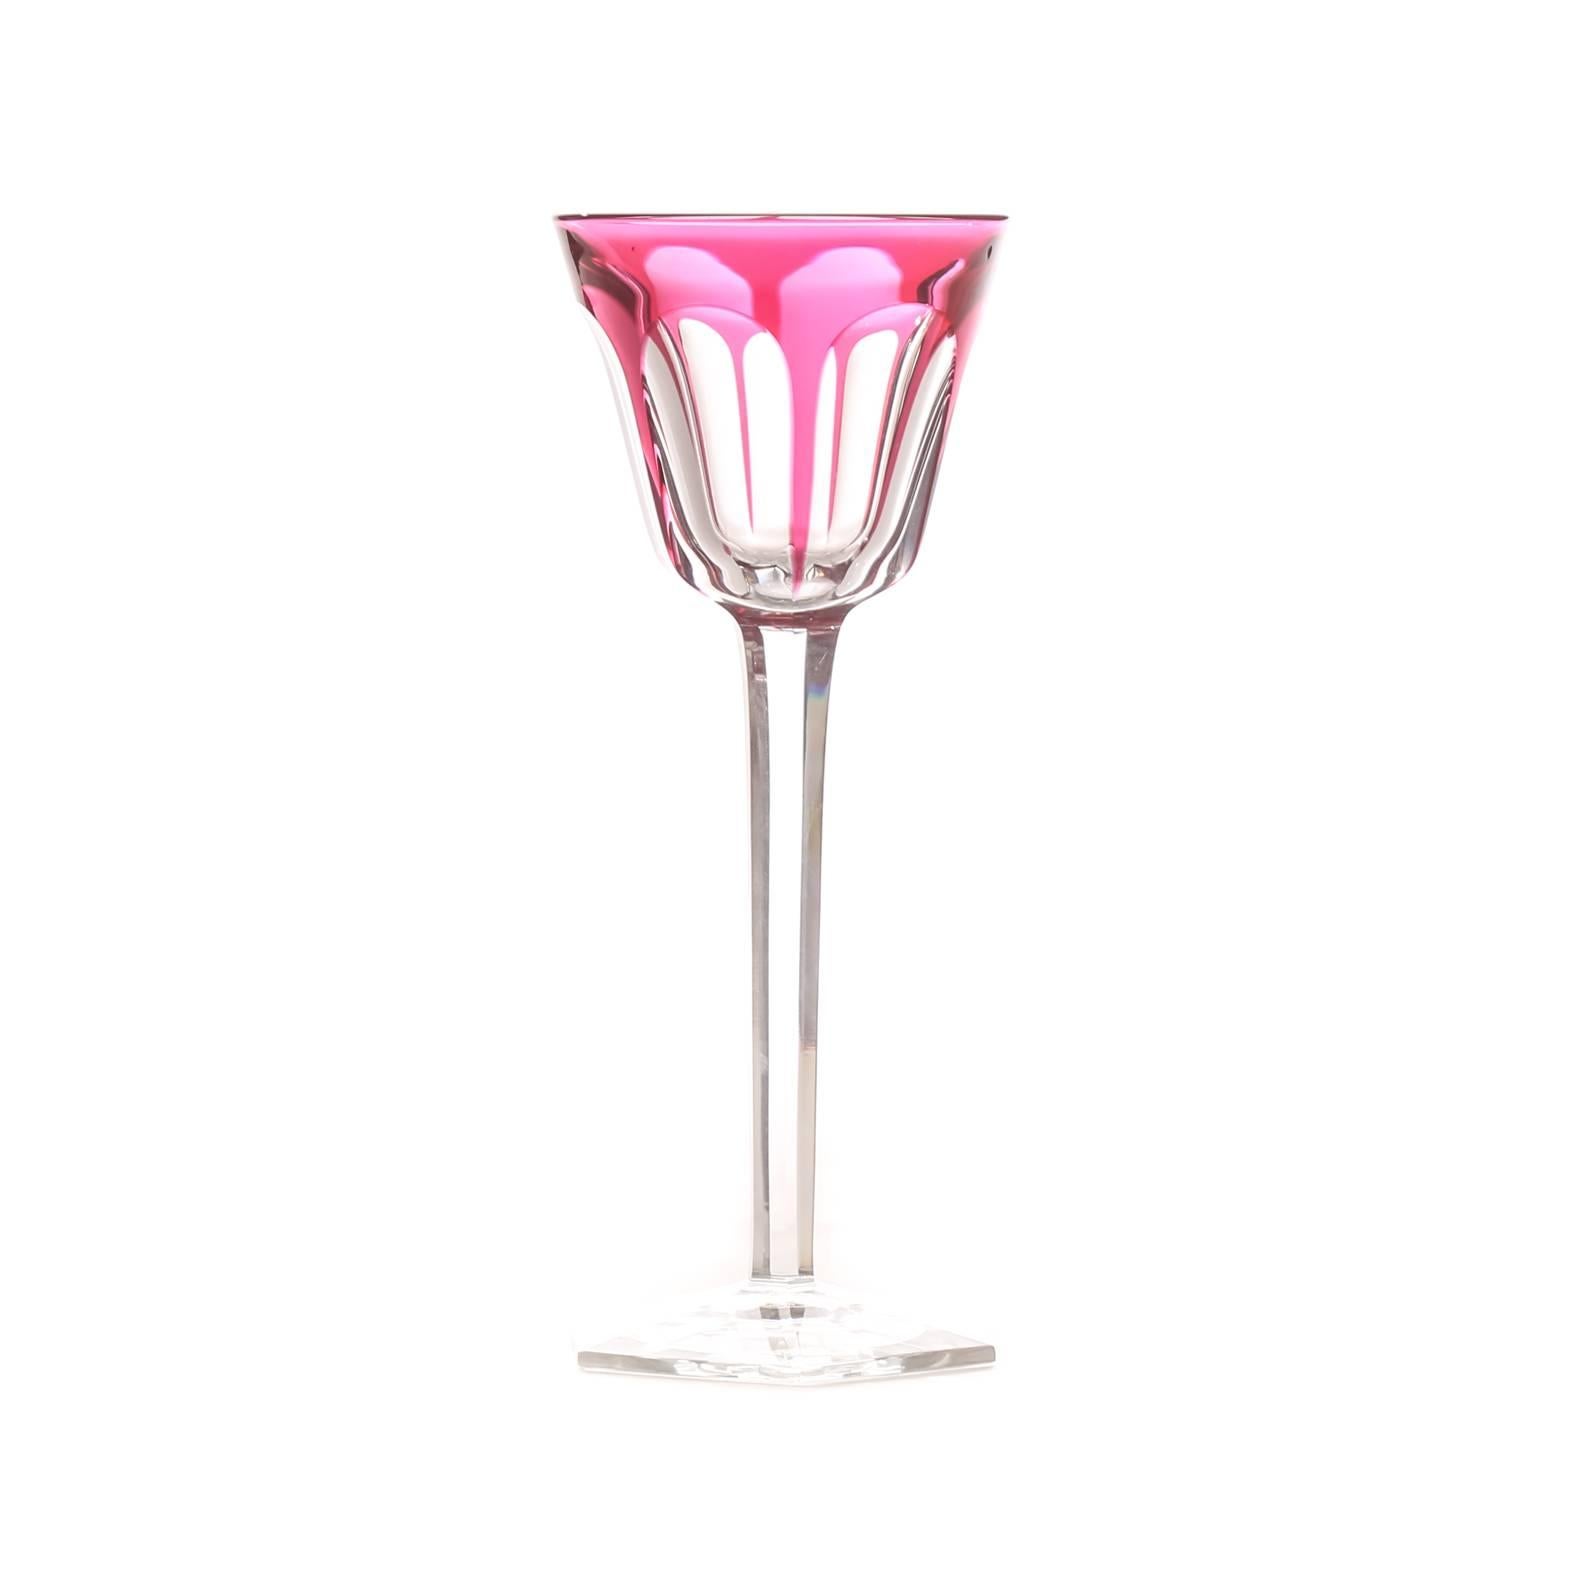 We have available a perfect size wine glass by Baccarat cut to clear in their signature ruby color. An elongated thumbprint design on the bowl and a nicely shaped foot. Signed. Measuring 7.5